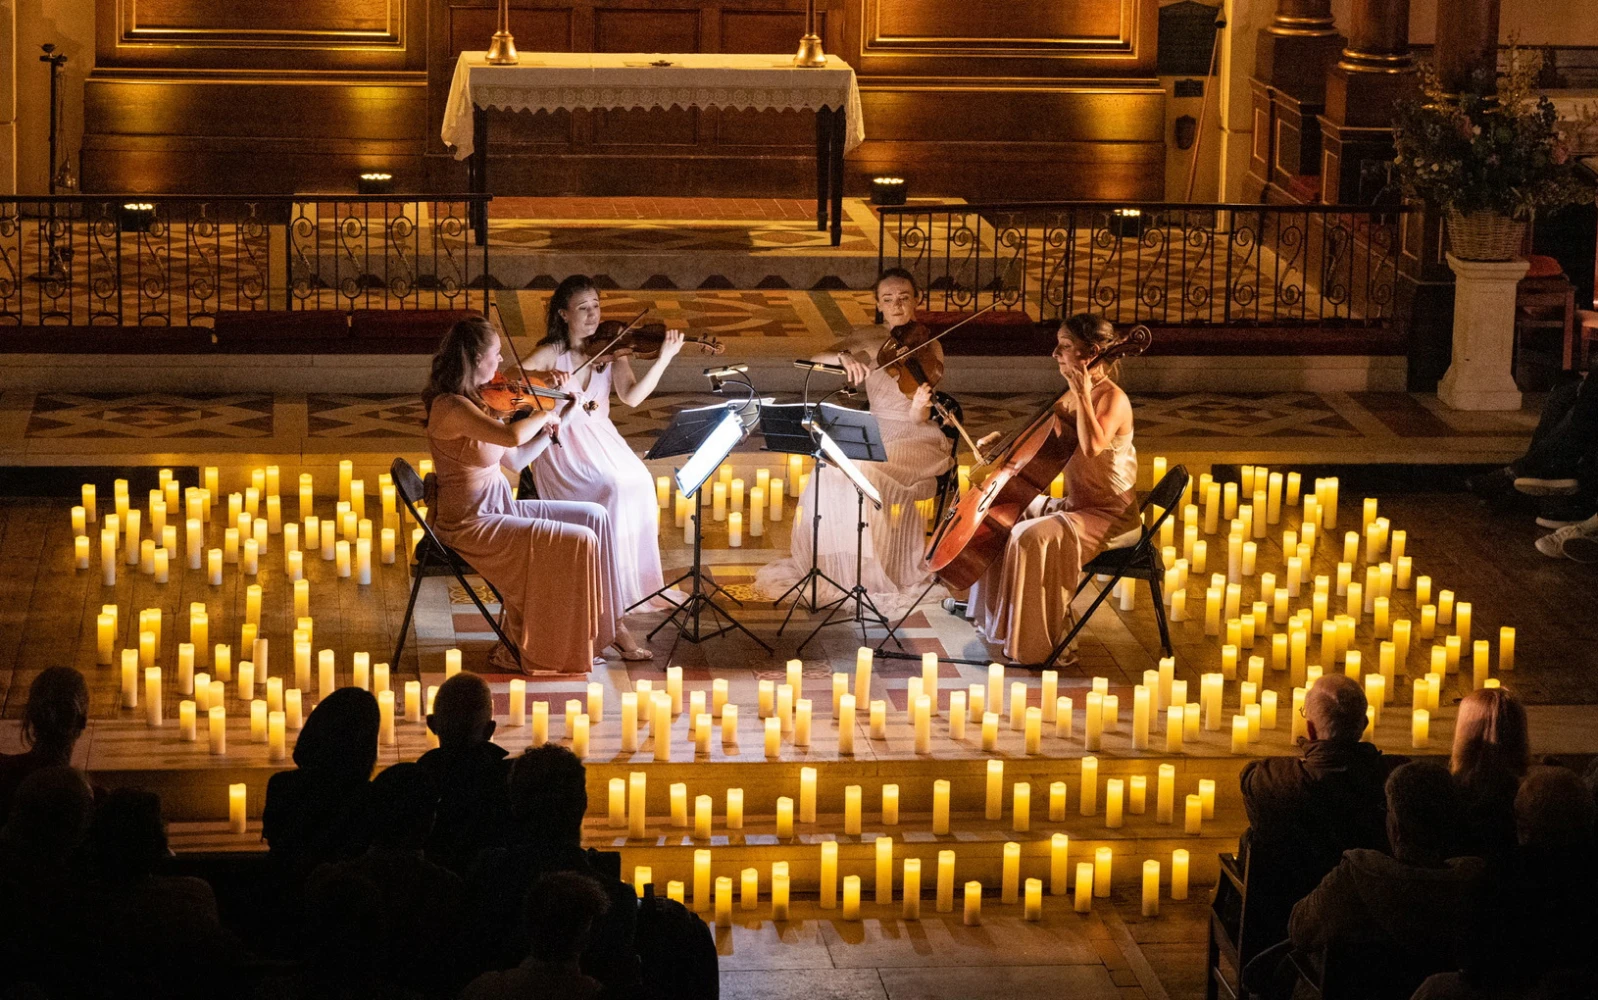 Musicals by Candlelight - Fan Night: What to expect - 2